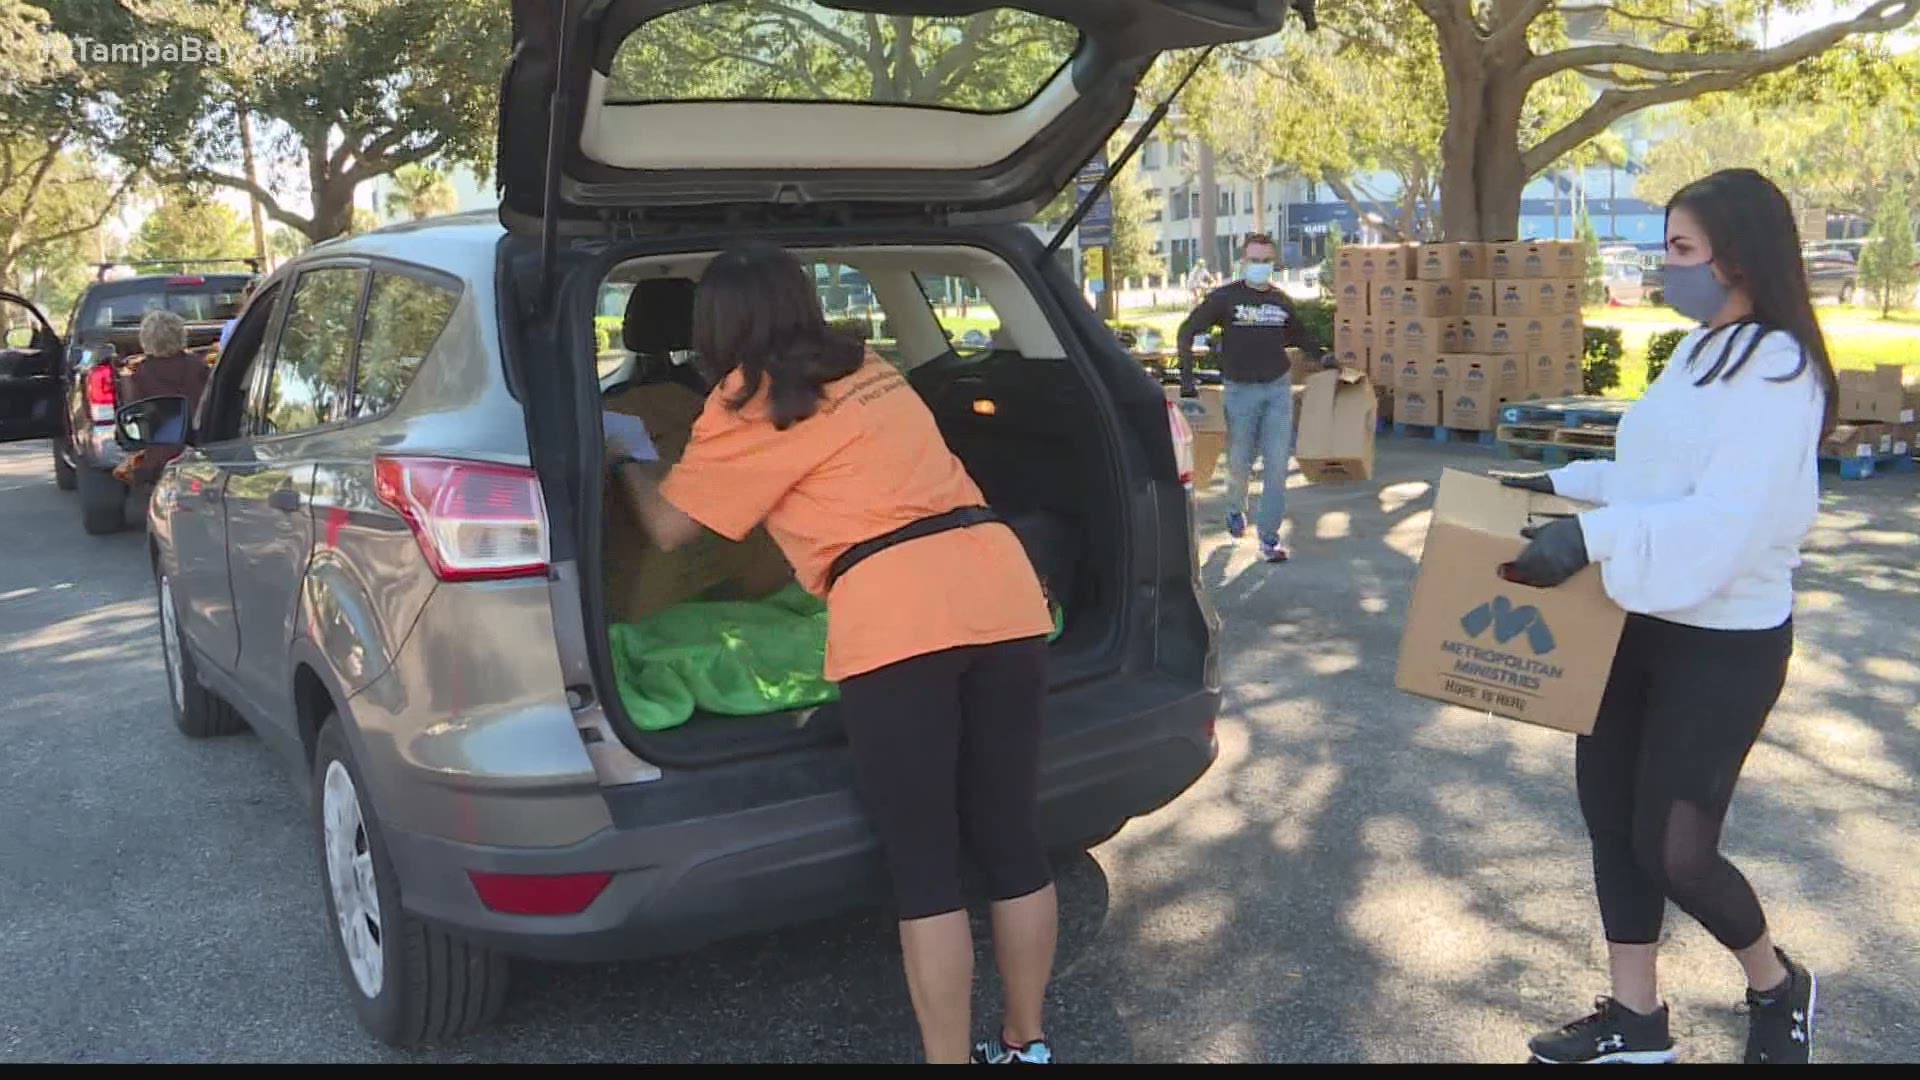 Thanksgiving showed local nonprofits just how great the need is for help this holiday season in Tampa Bay.